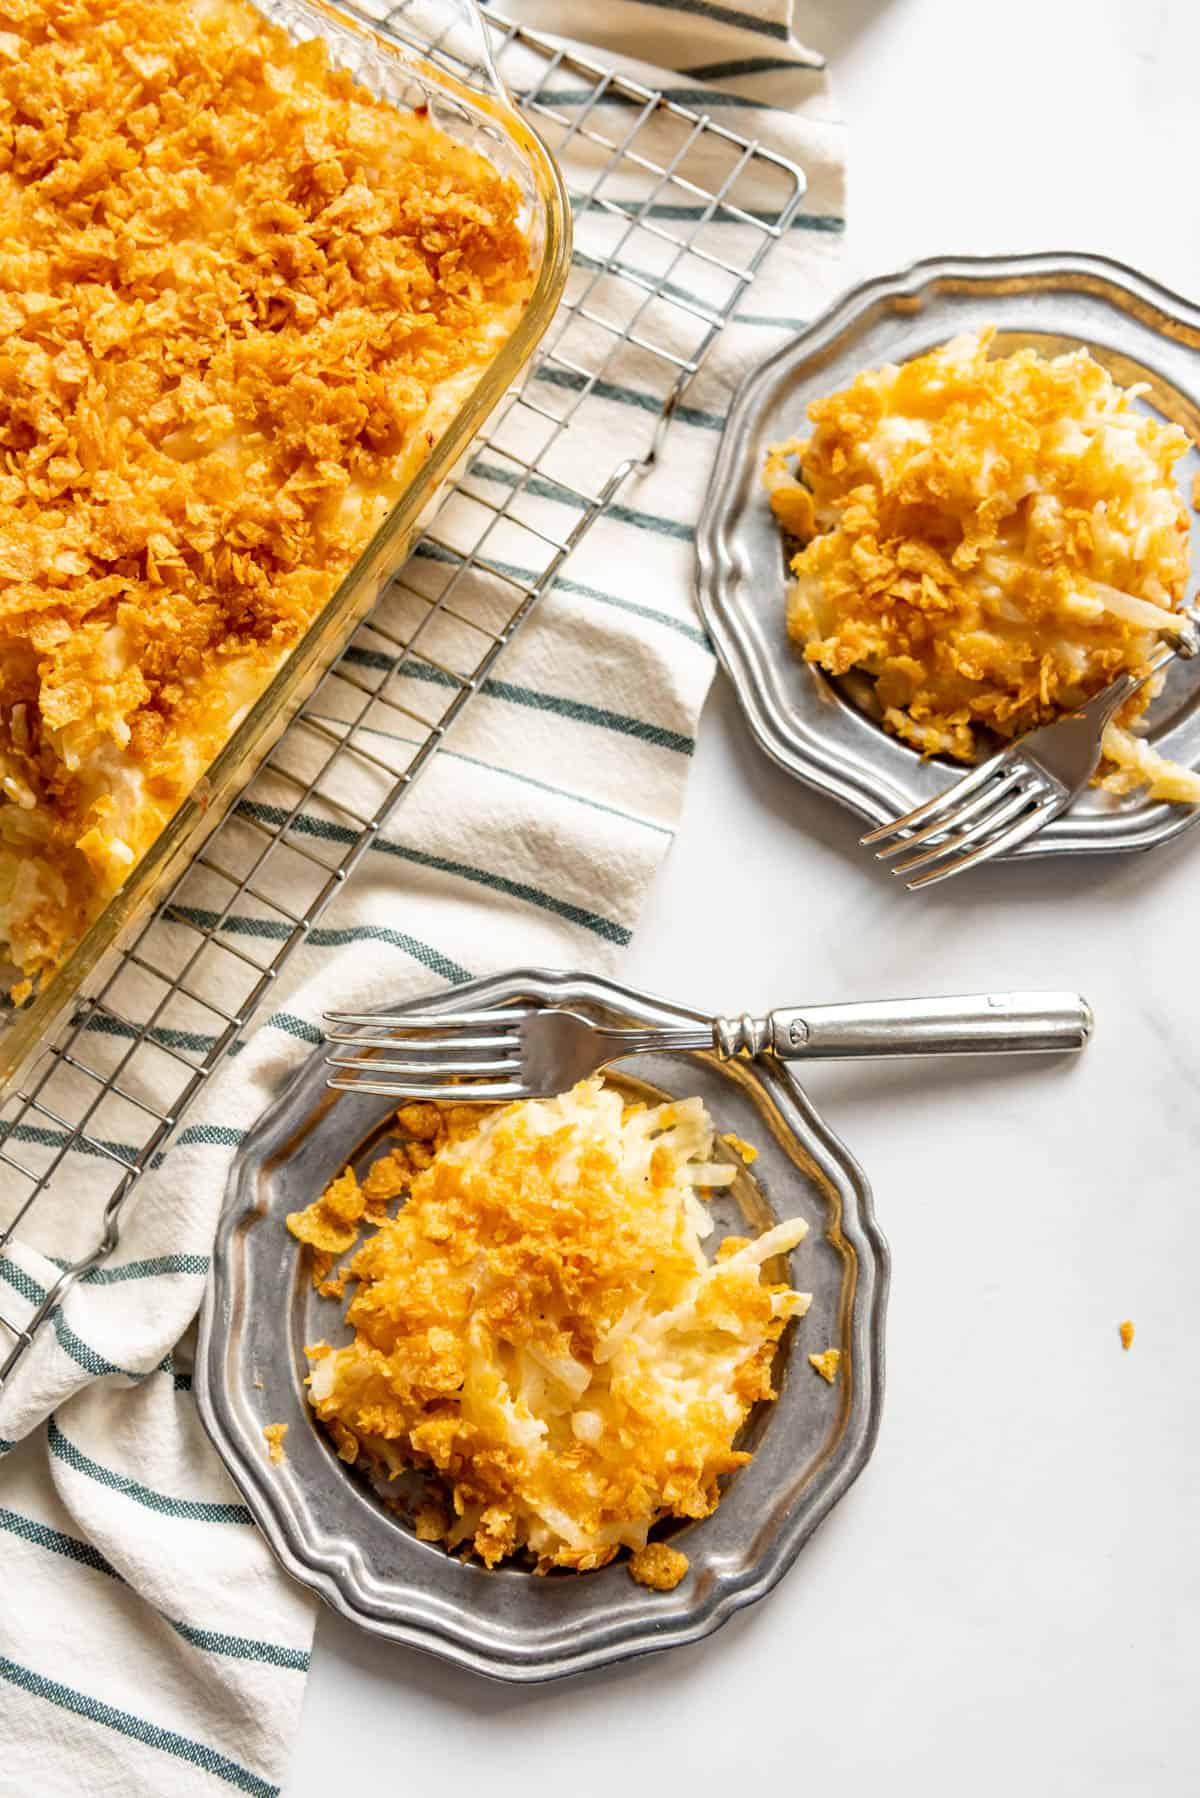 Plates of cheesy funeral potatoes next to a casserole dish.